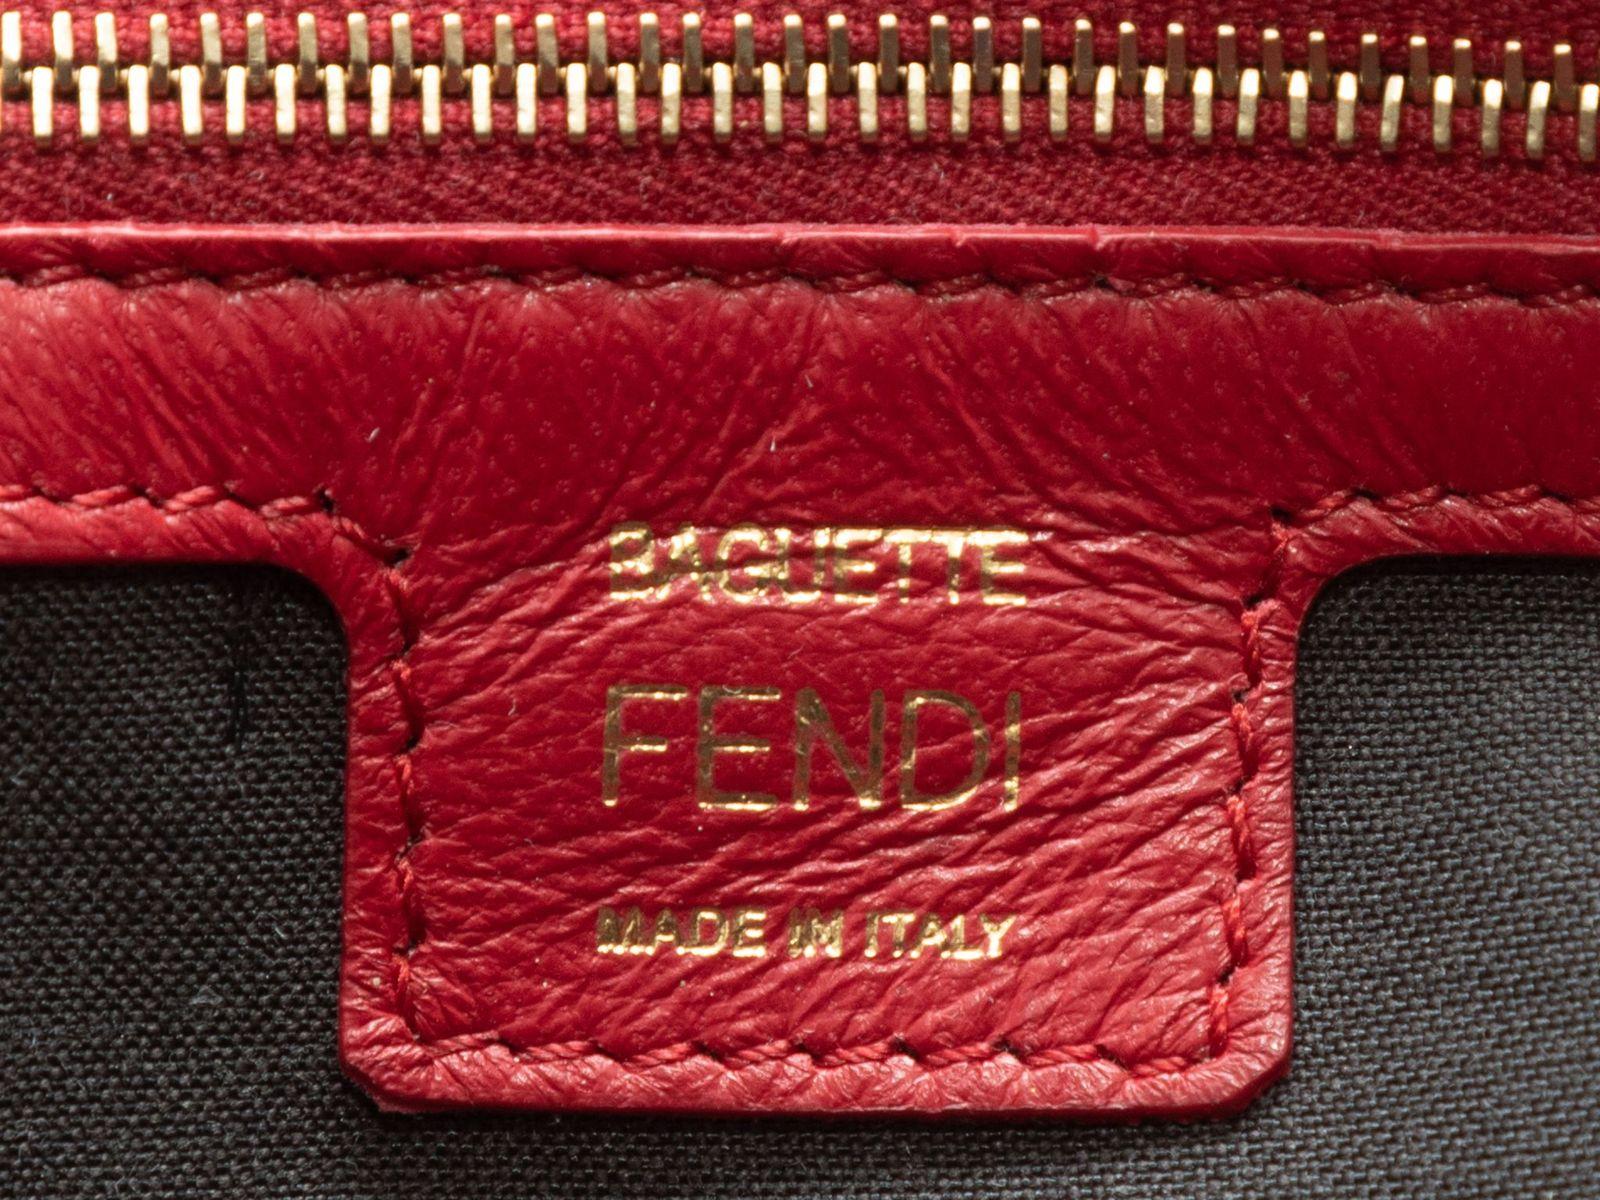 Product Details: Red Fendi Embossed Leather Zucca NM Baguette Bag. This Zucca NM Baguette Bag features an embossed leather body, gold-tone hardware, a single flat shoulder strap, and a front logo flap closure. 14